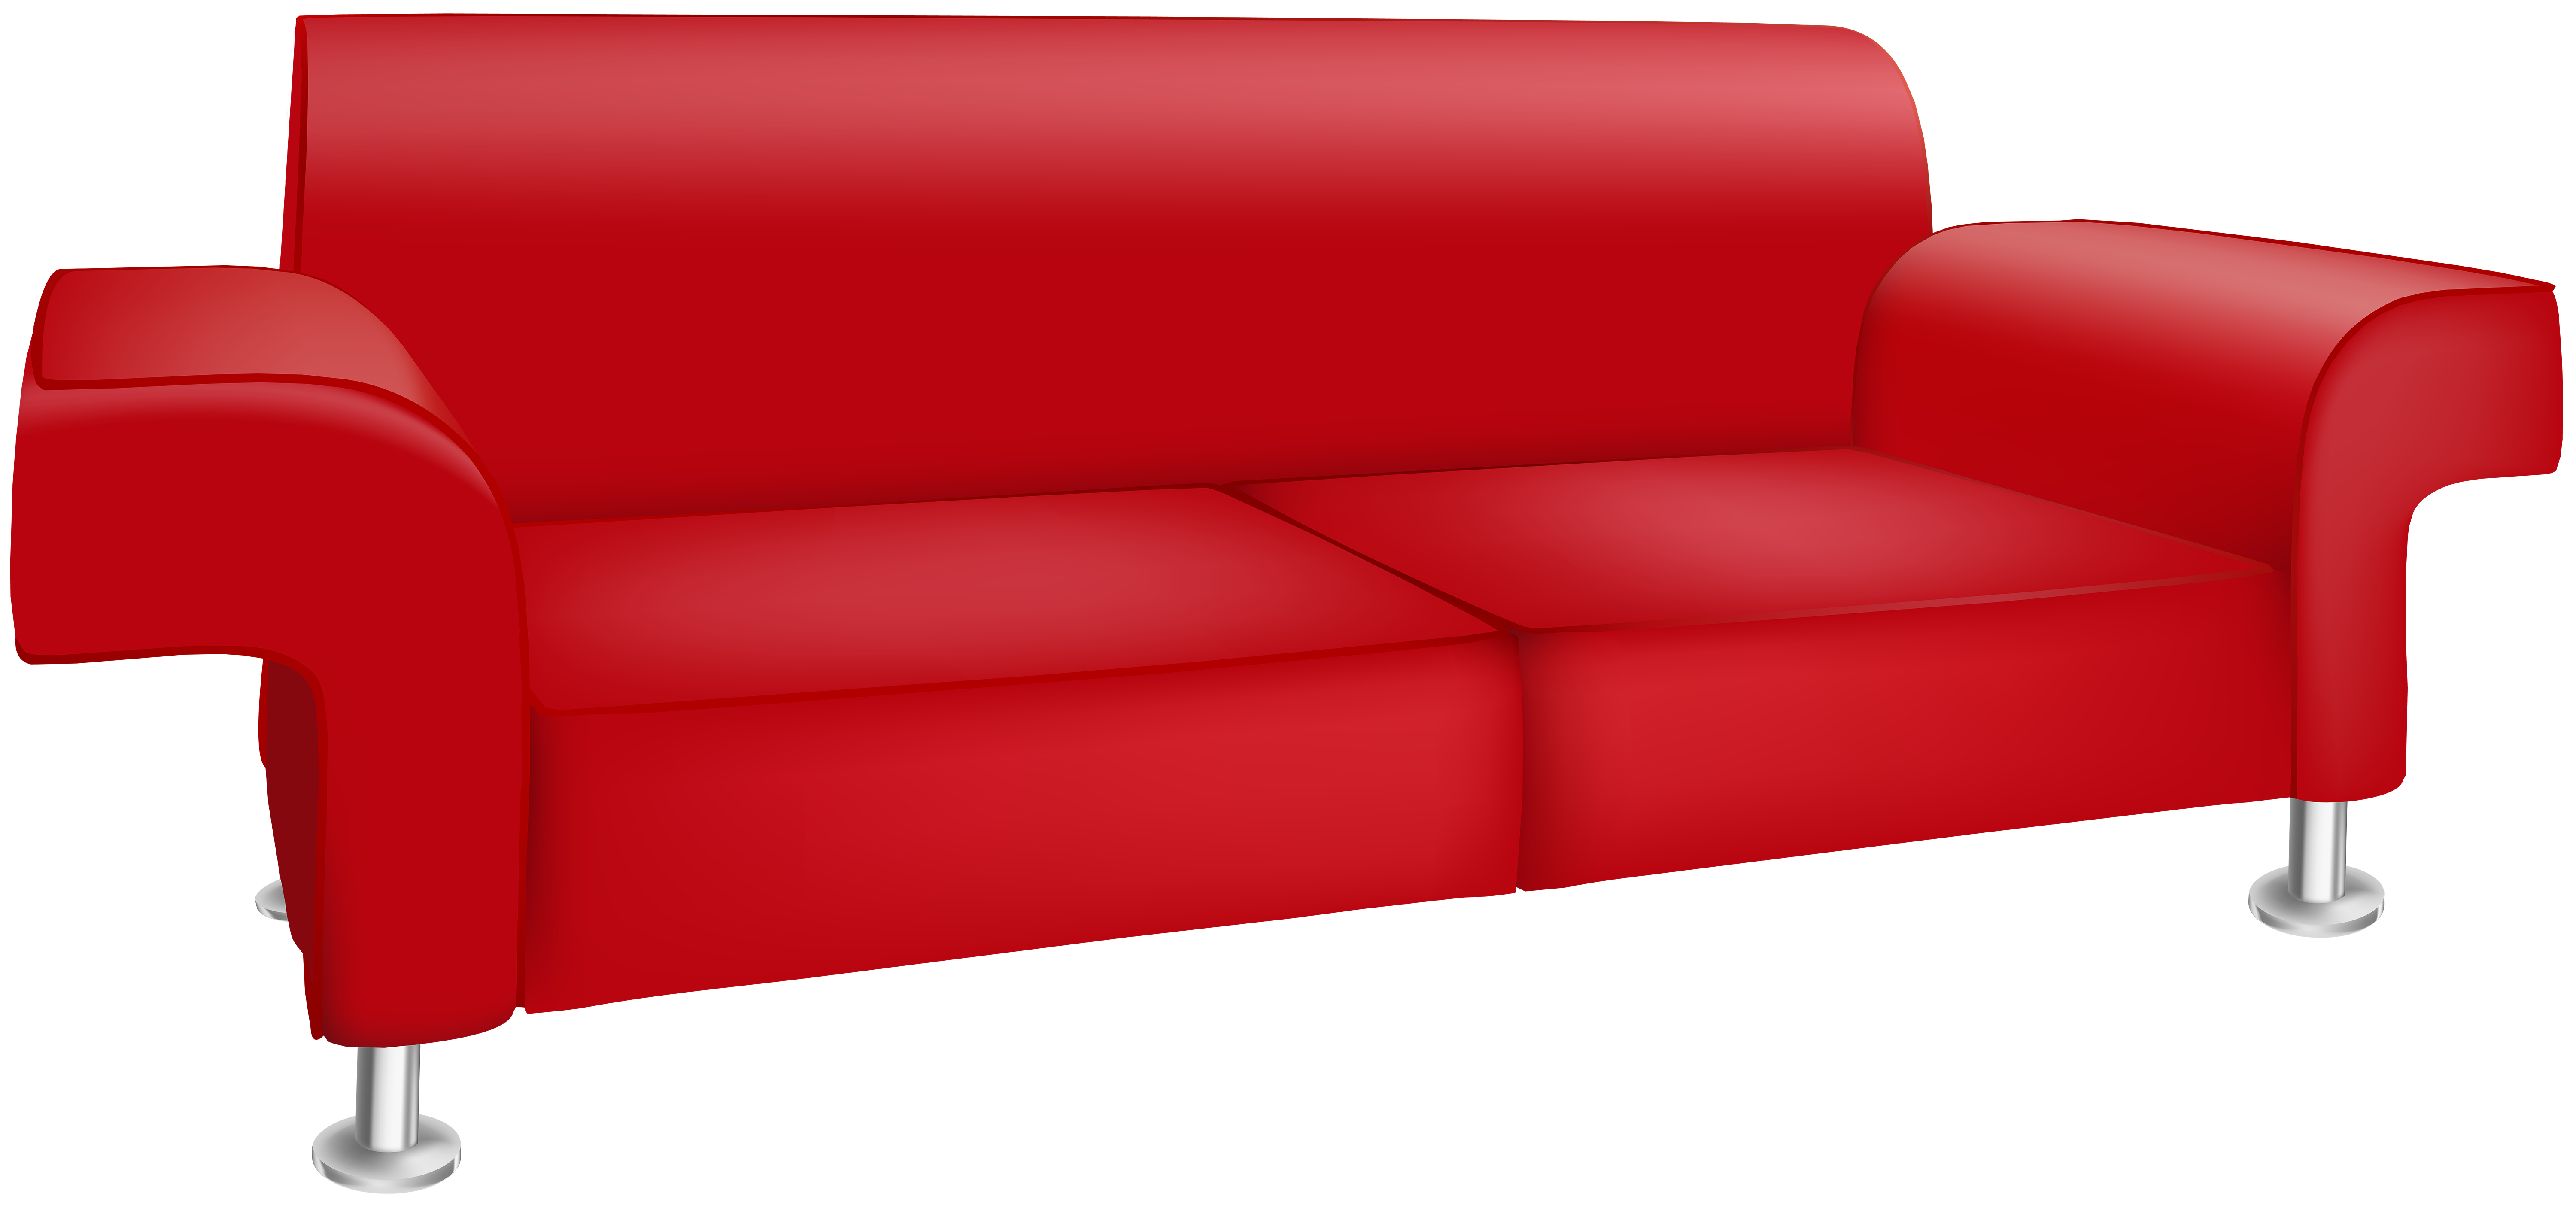 Red Sofa Transparent Clip Art PNG Image | Gallery Yopriceville - High